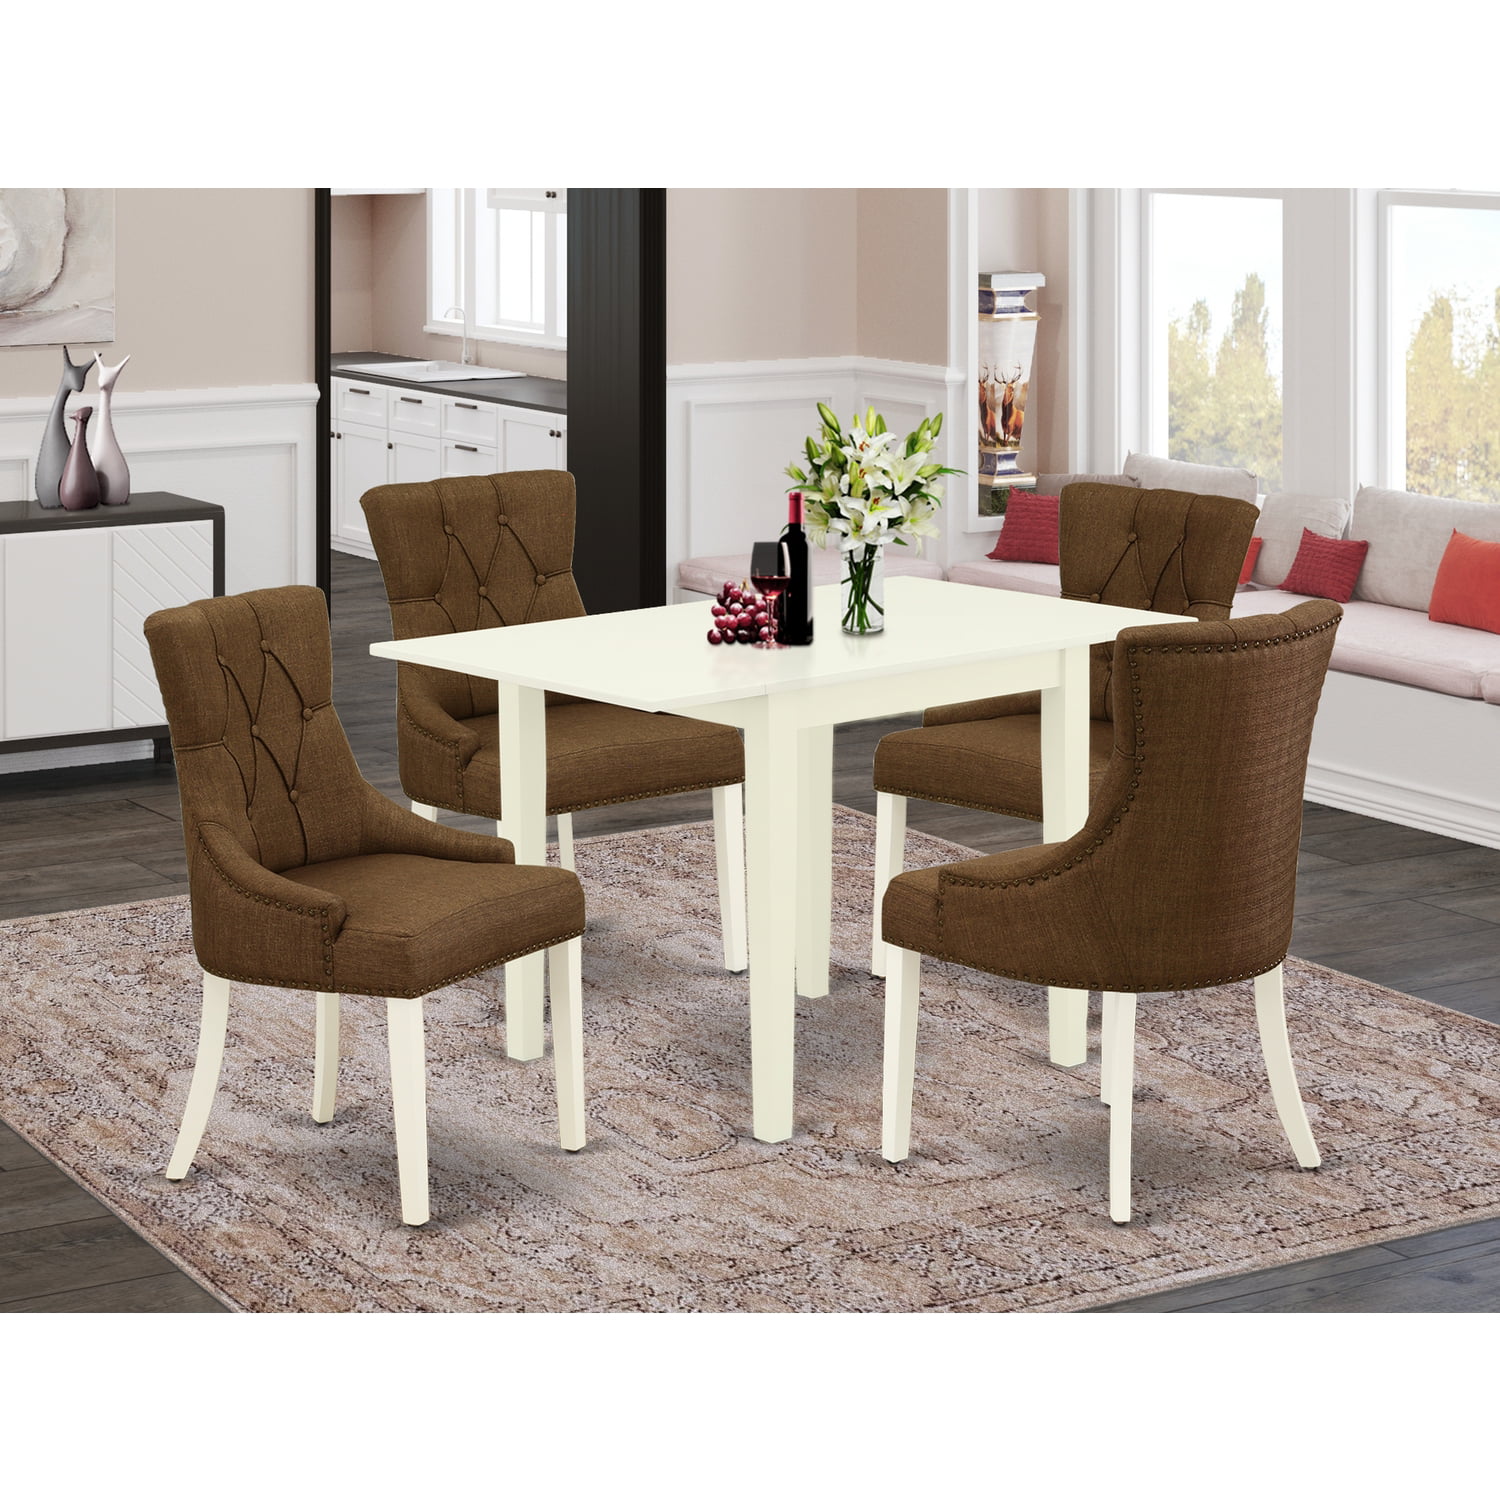 East West Furniture DLFL5-ANA-04 5-Pc Dining Room Table Set 